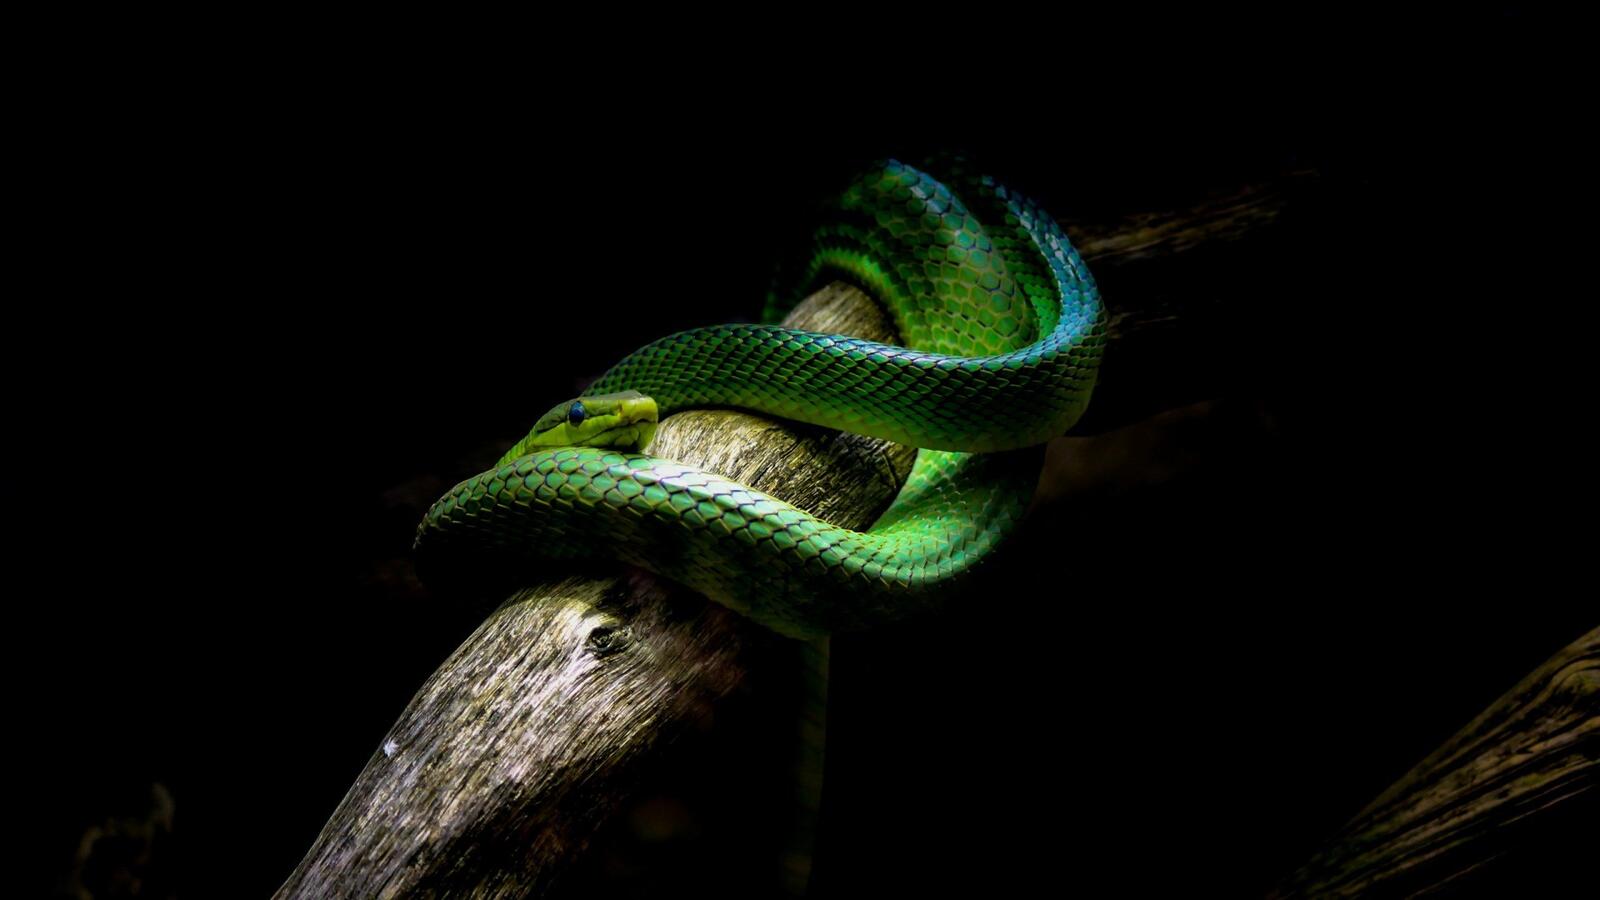 Free photo A green scary snake on a branch.